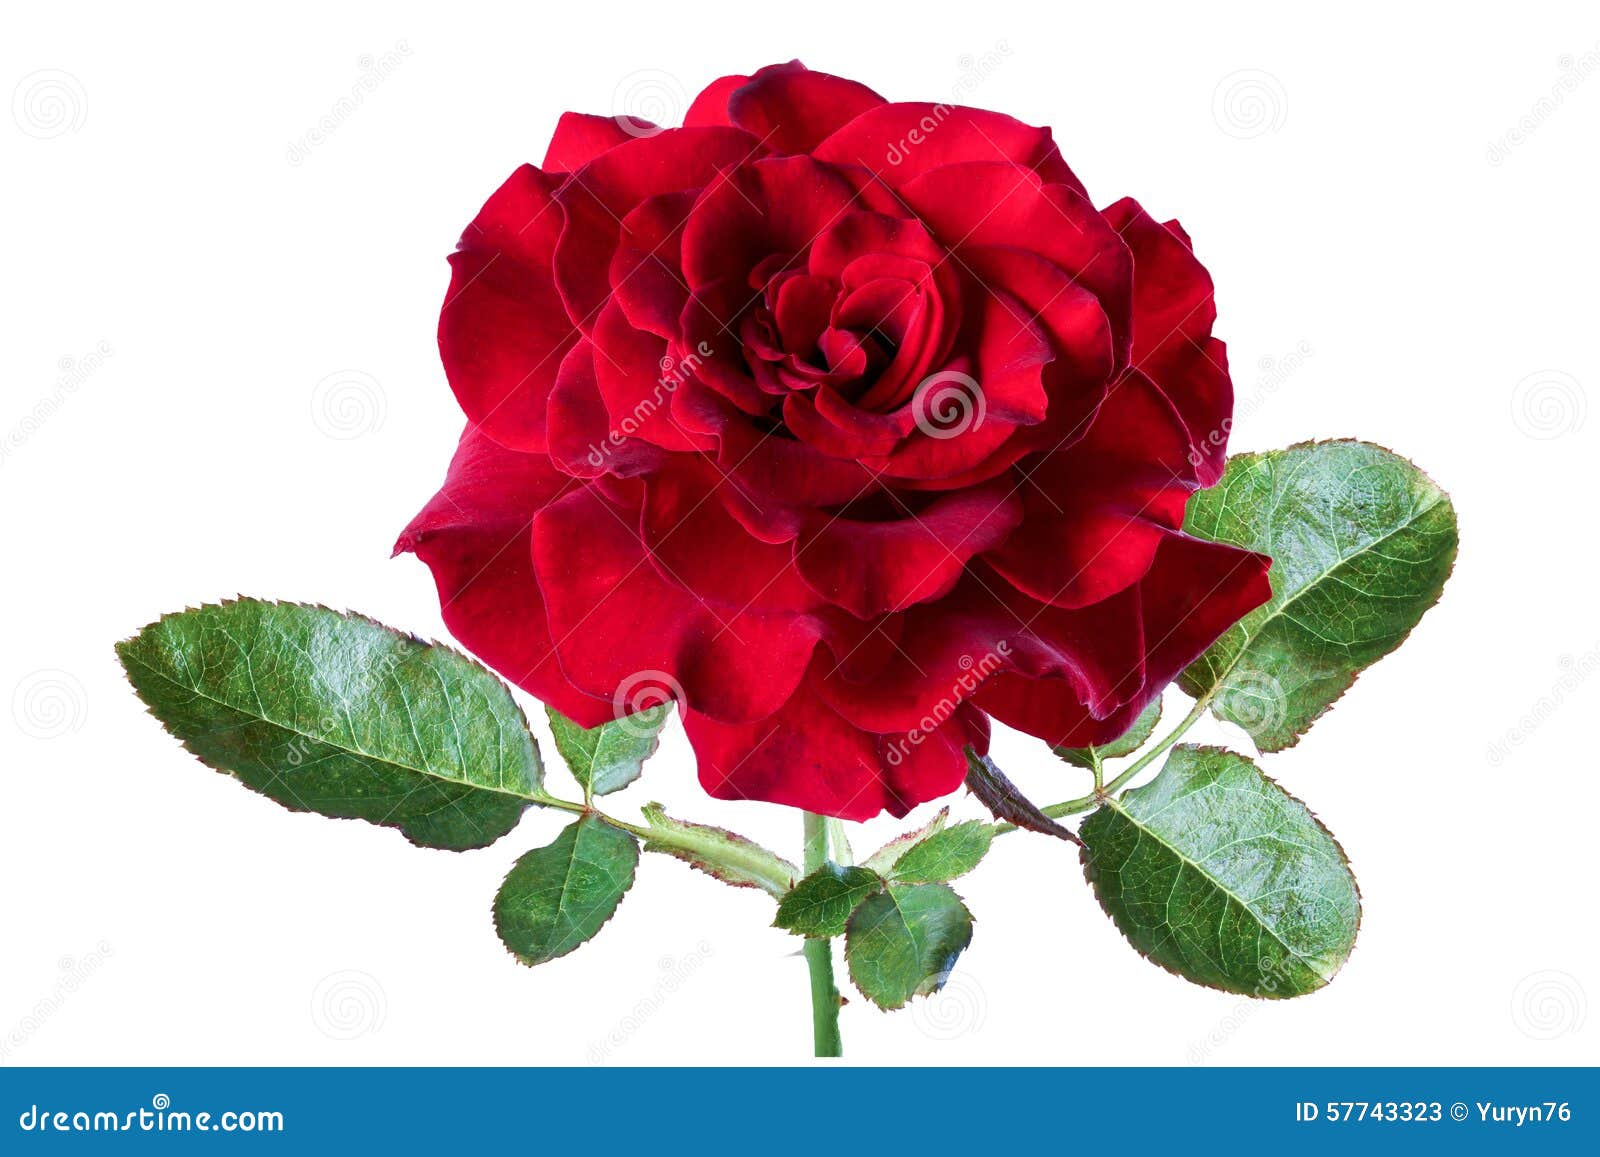 Red rose, isolate stock image. Image of floral, white - 57743323